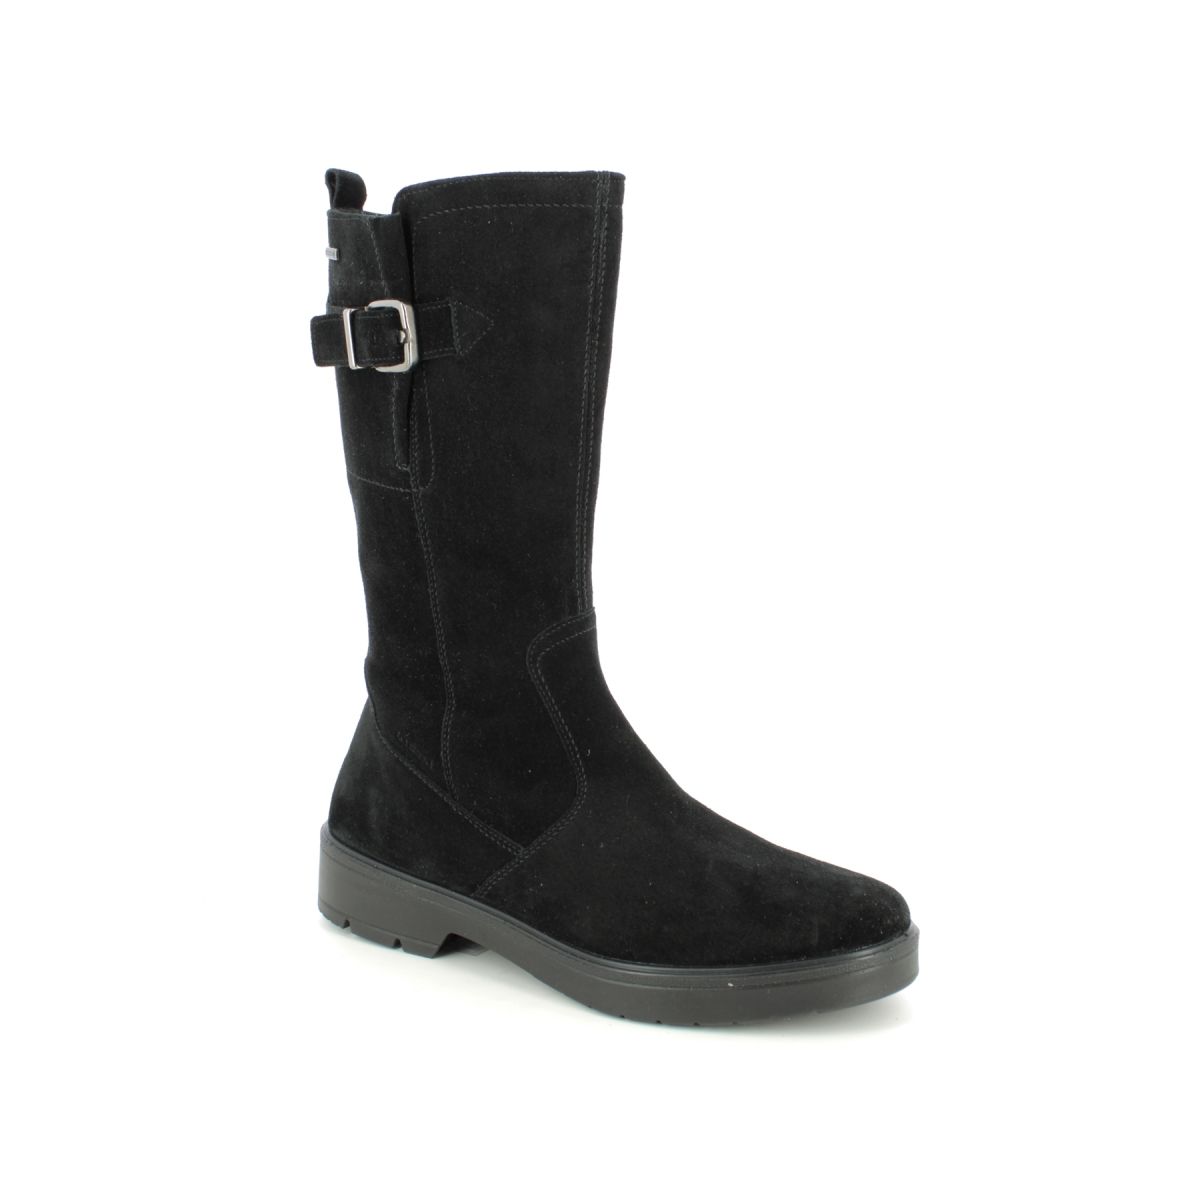 Legero Mystic Mid Gtx Black Suede Womens Mid Calf Boots 2000196-0000 In Size 6.5 In Plain Black Suede